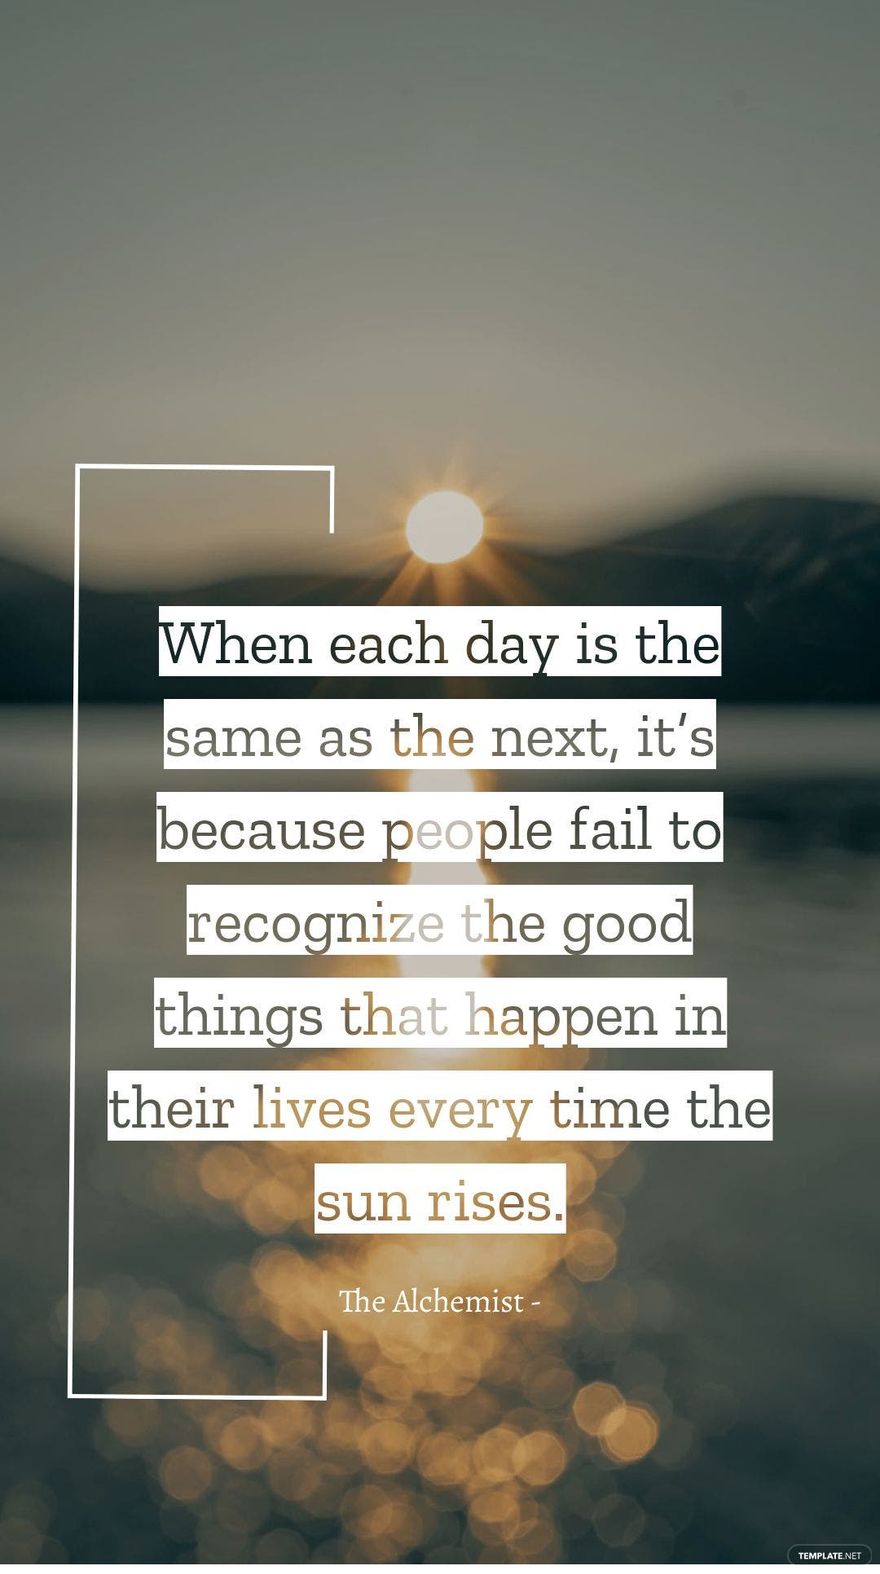 The Alchemist - When each day is the same as the next, it’s because people fail to recognize the good things that happen in their lives every time the sun rises.